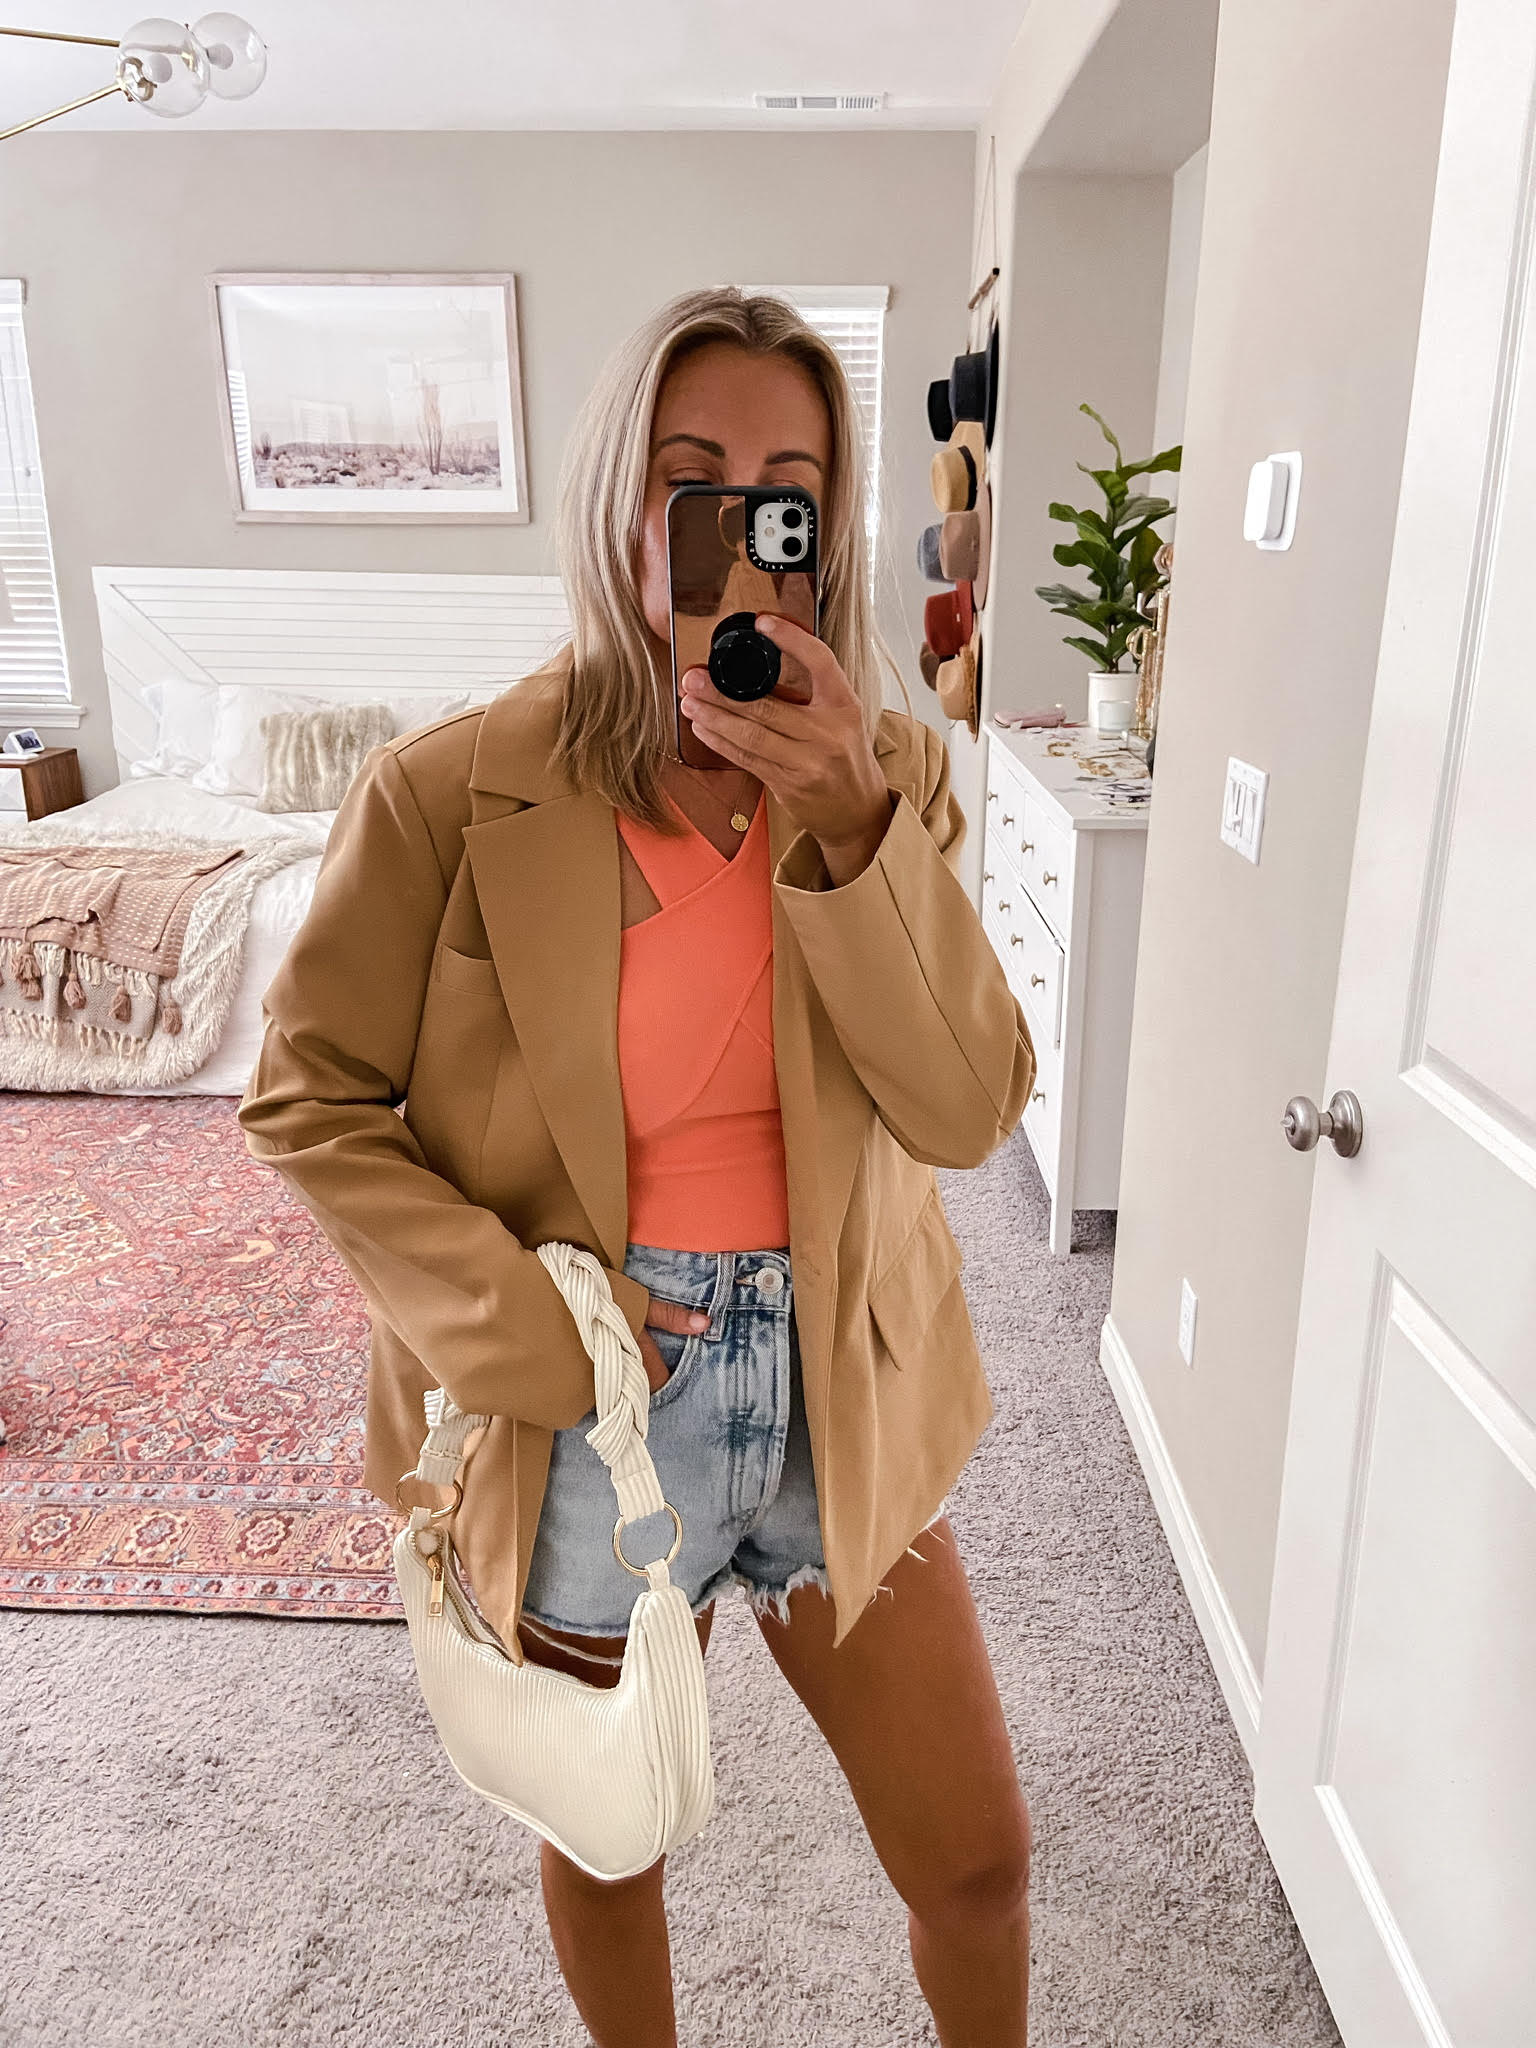 MY LATEST FOREVER21 FINDS-JACLYN DE LEON STYLE. FOREVER21 outfits. Everything from a casual chic buttondown, boho dress, 90's inspired jeans, chic blazer, and preppy school girl outfit.